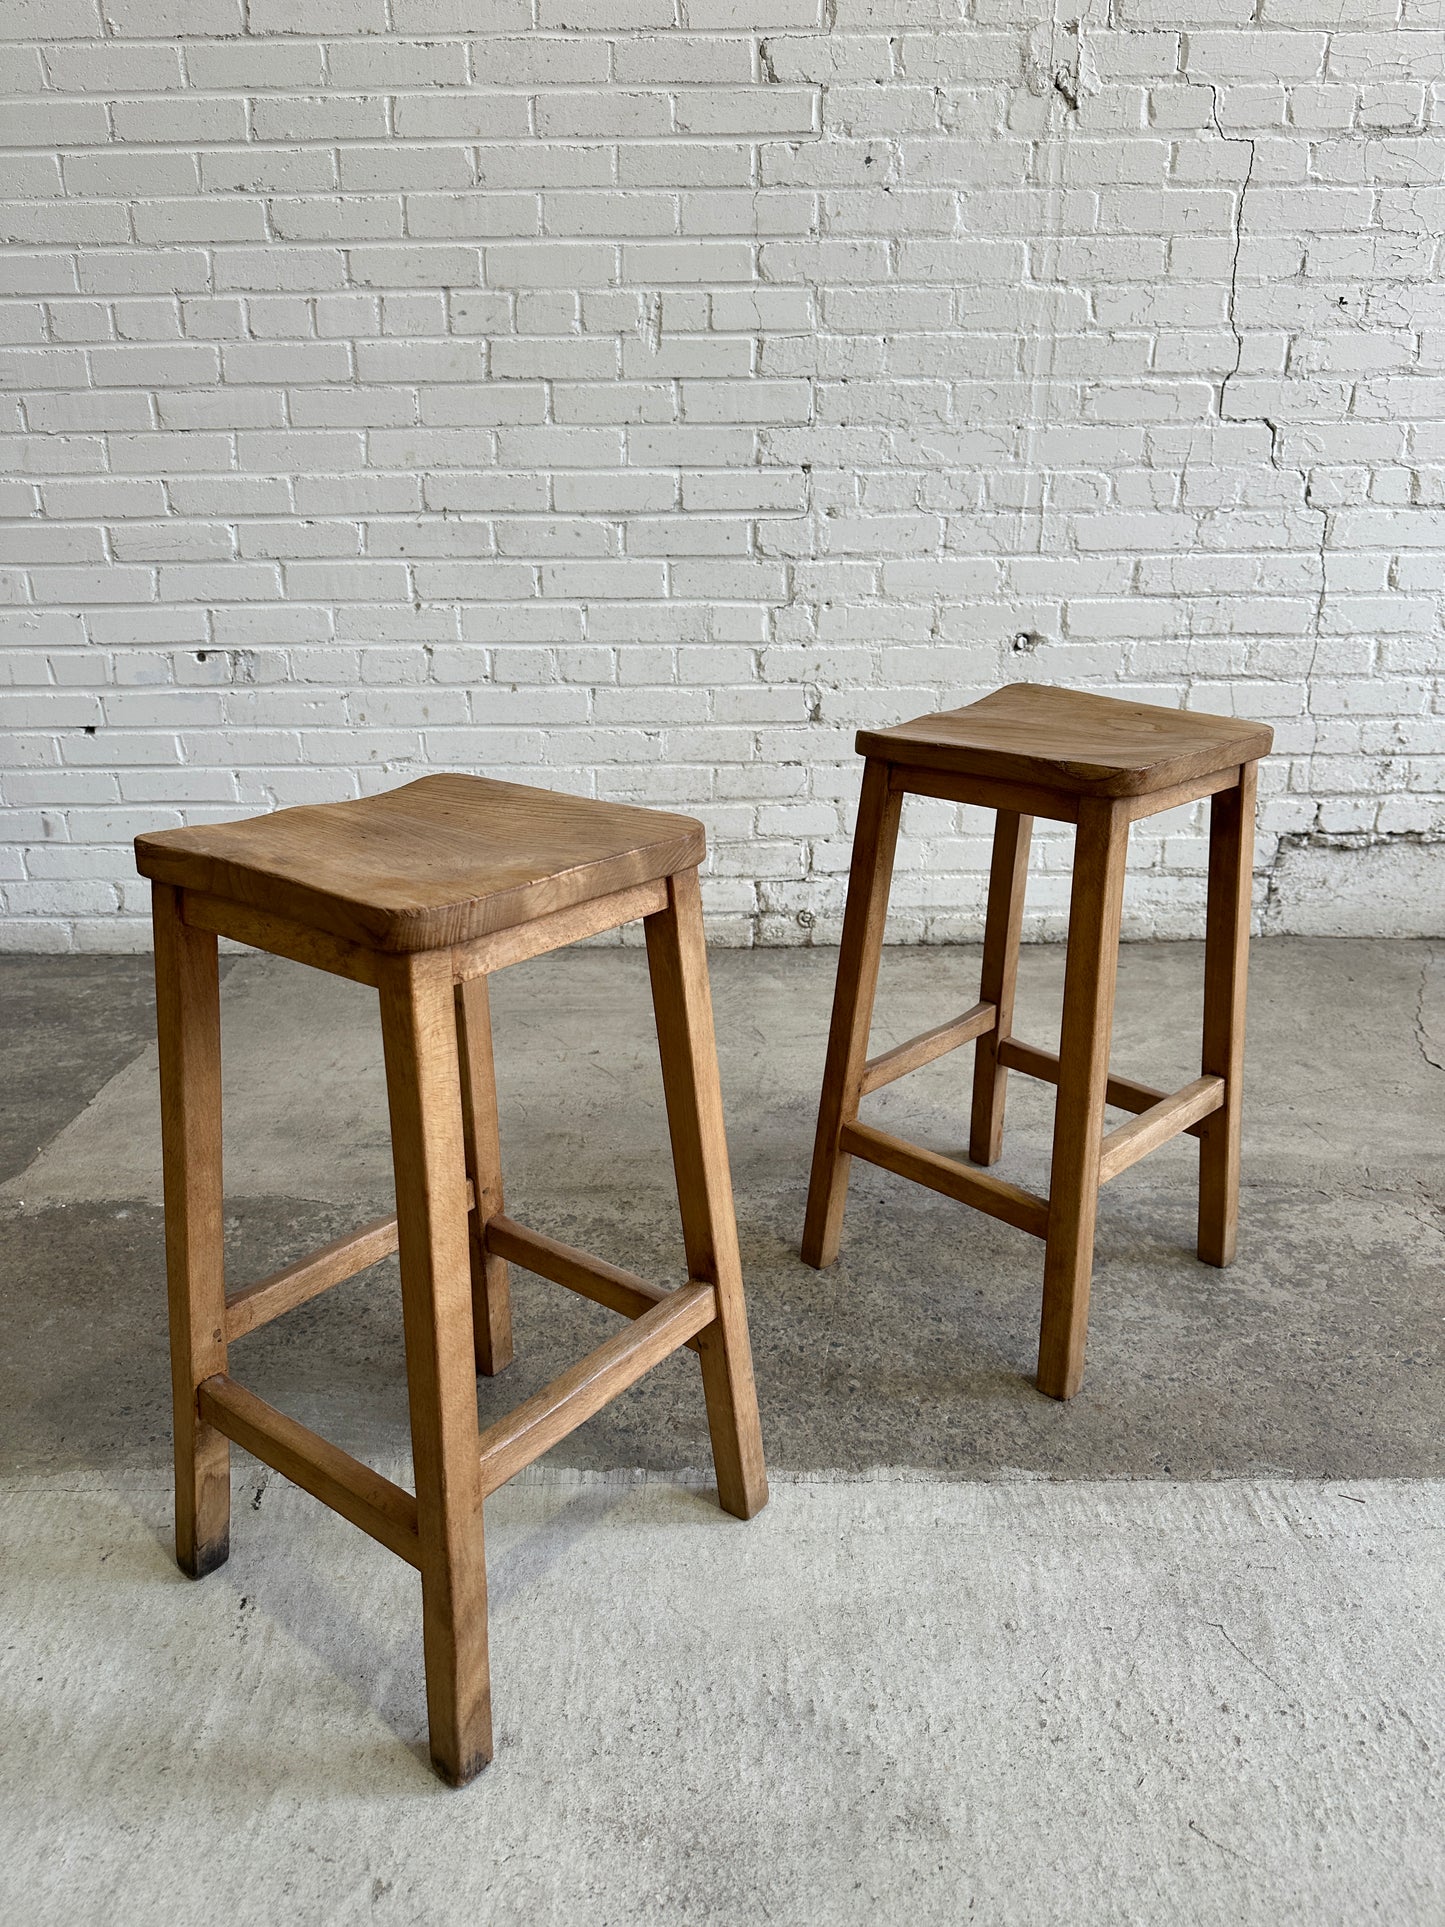 Antique English Pair of Stools with Saddle Seats, c. 1920